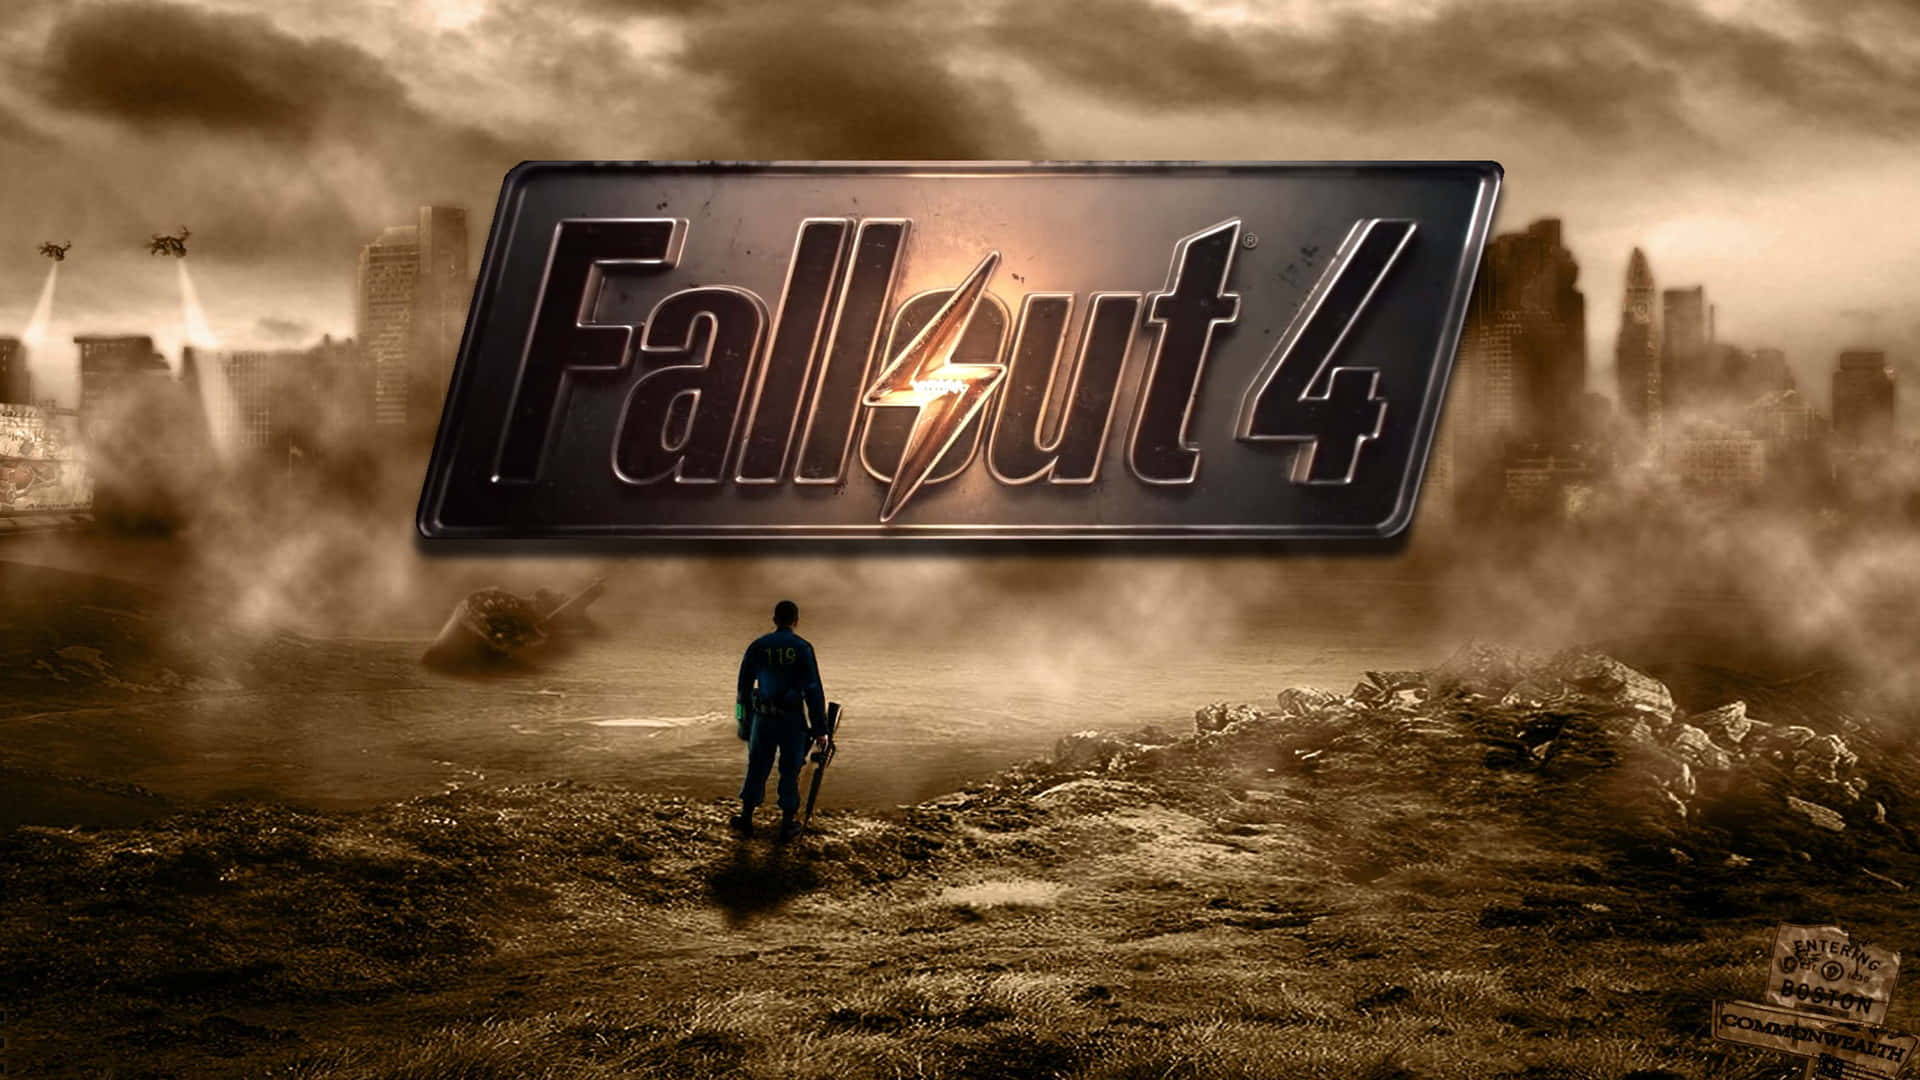 Image A Fallout 4 Computer in a Post-Apocalyptic Wasteland Wallpaper